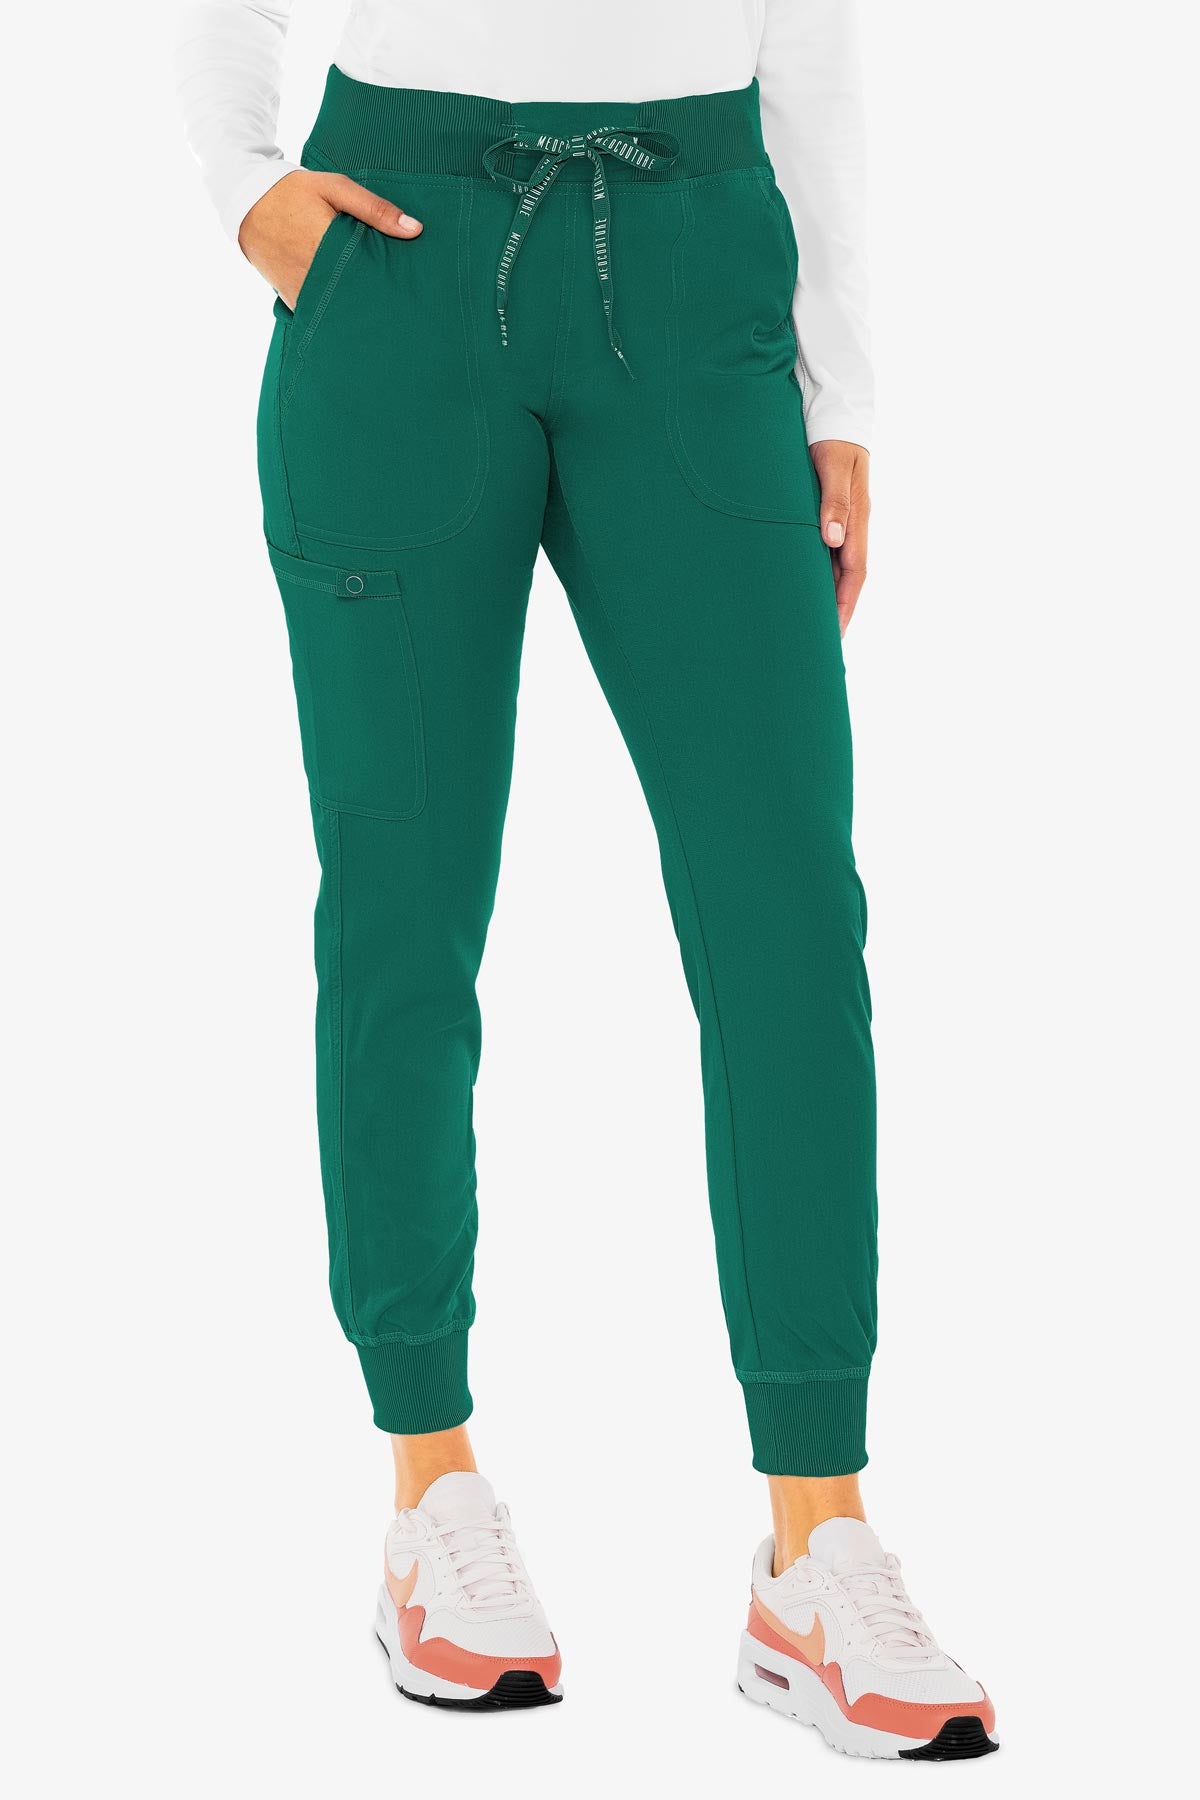 Med Couture Touch 7739 Yoga Cargo Pant